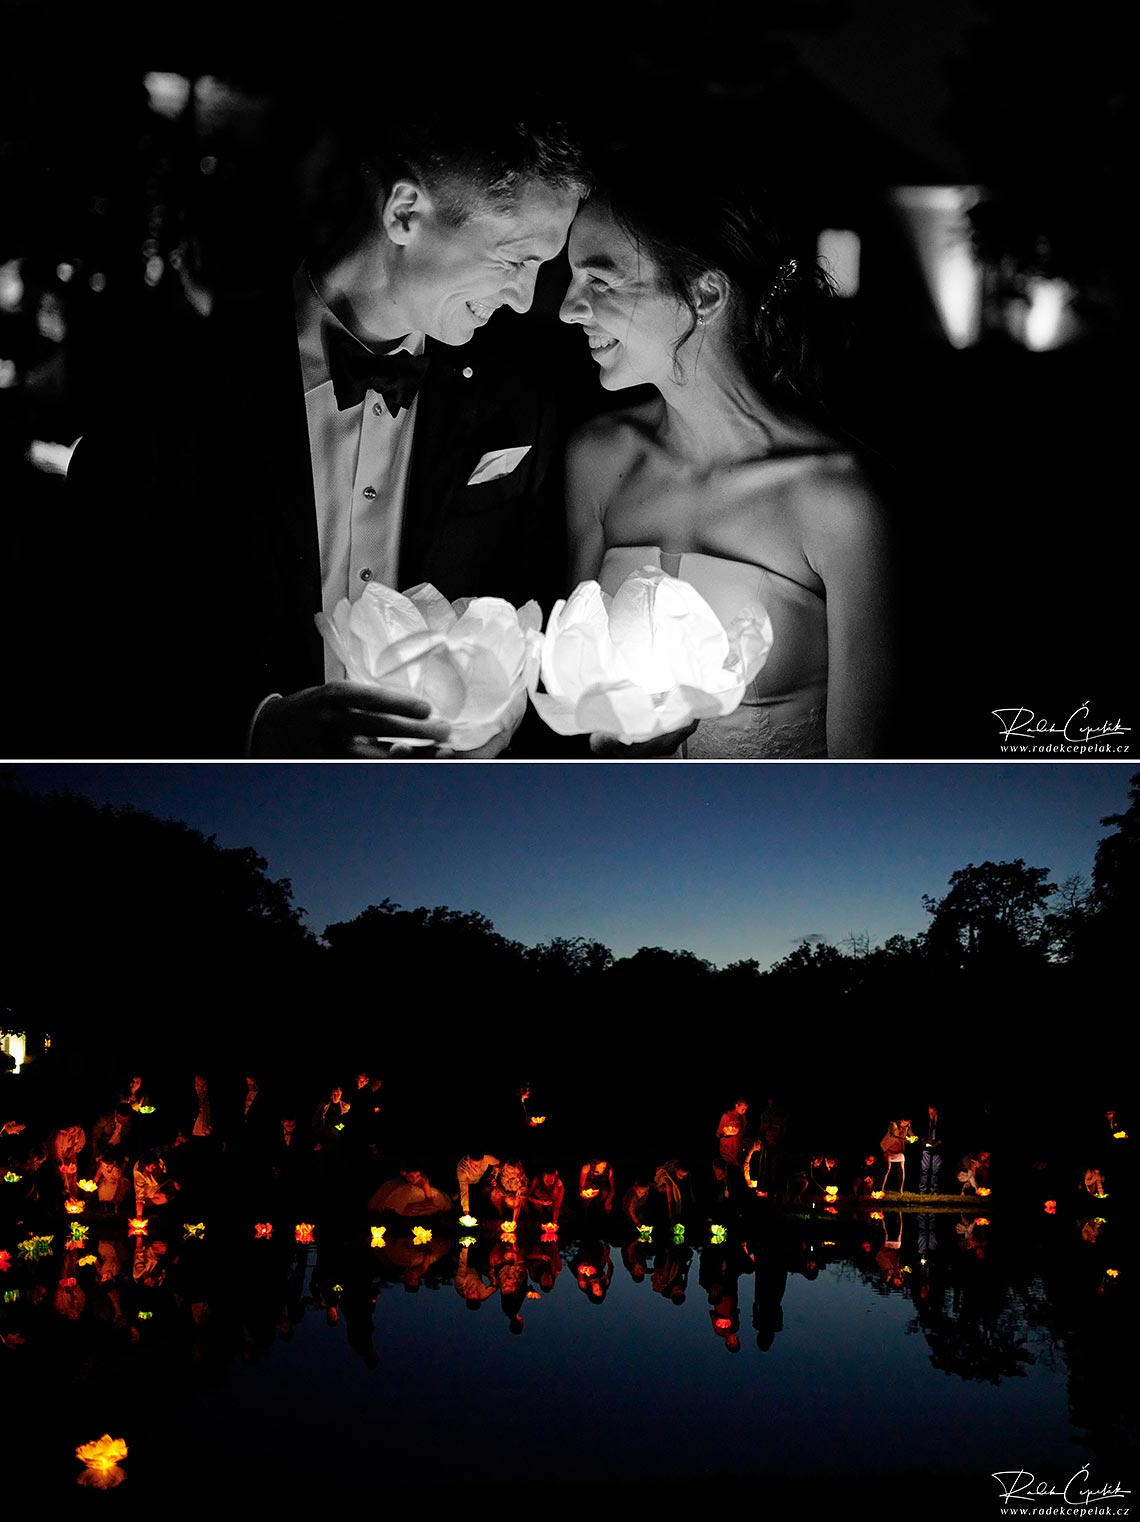 Bride and groom wedding photography during lighting lotuses to put them on the water of pond